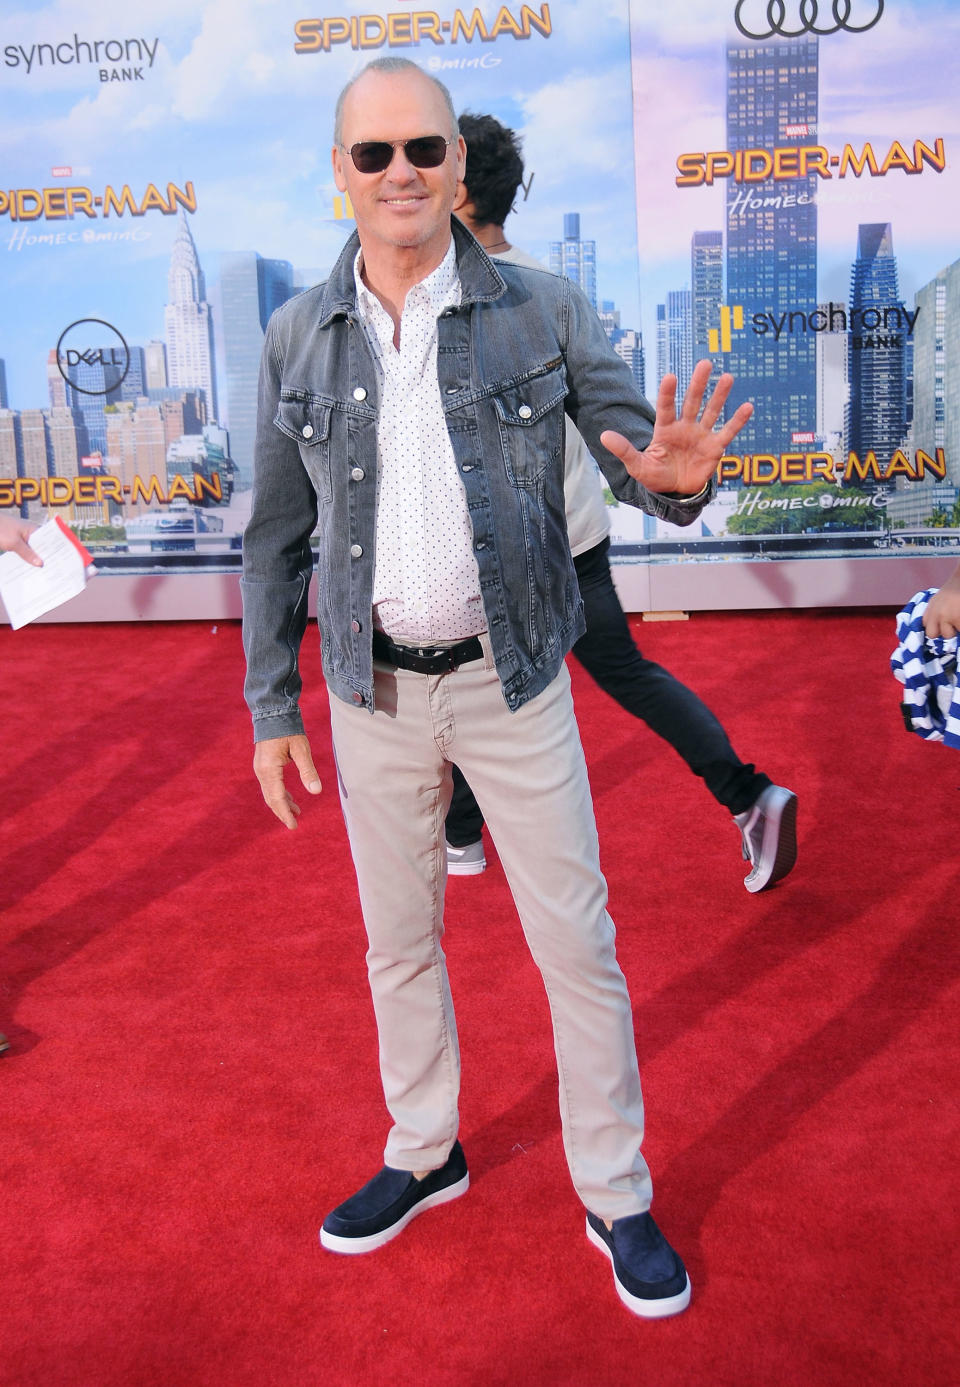 Full length shot of Michael wearing a blue-grey denim jacket, white shirt with black dots, stone coloured jeans and pumps at the Spider-Man: Homecoming premiere.